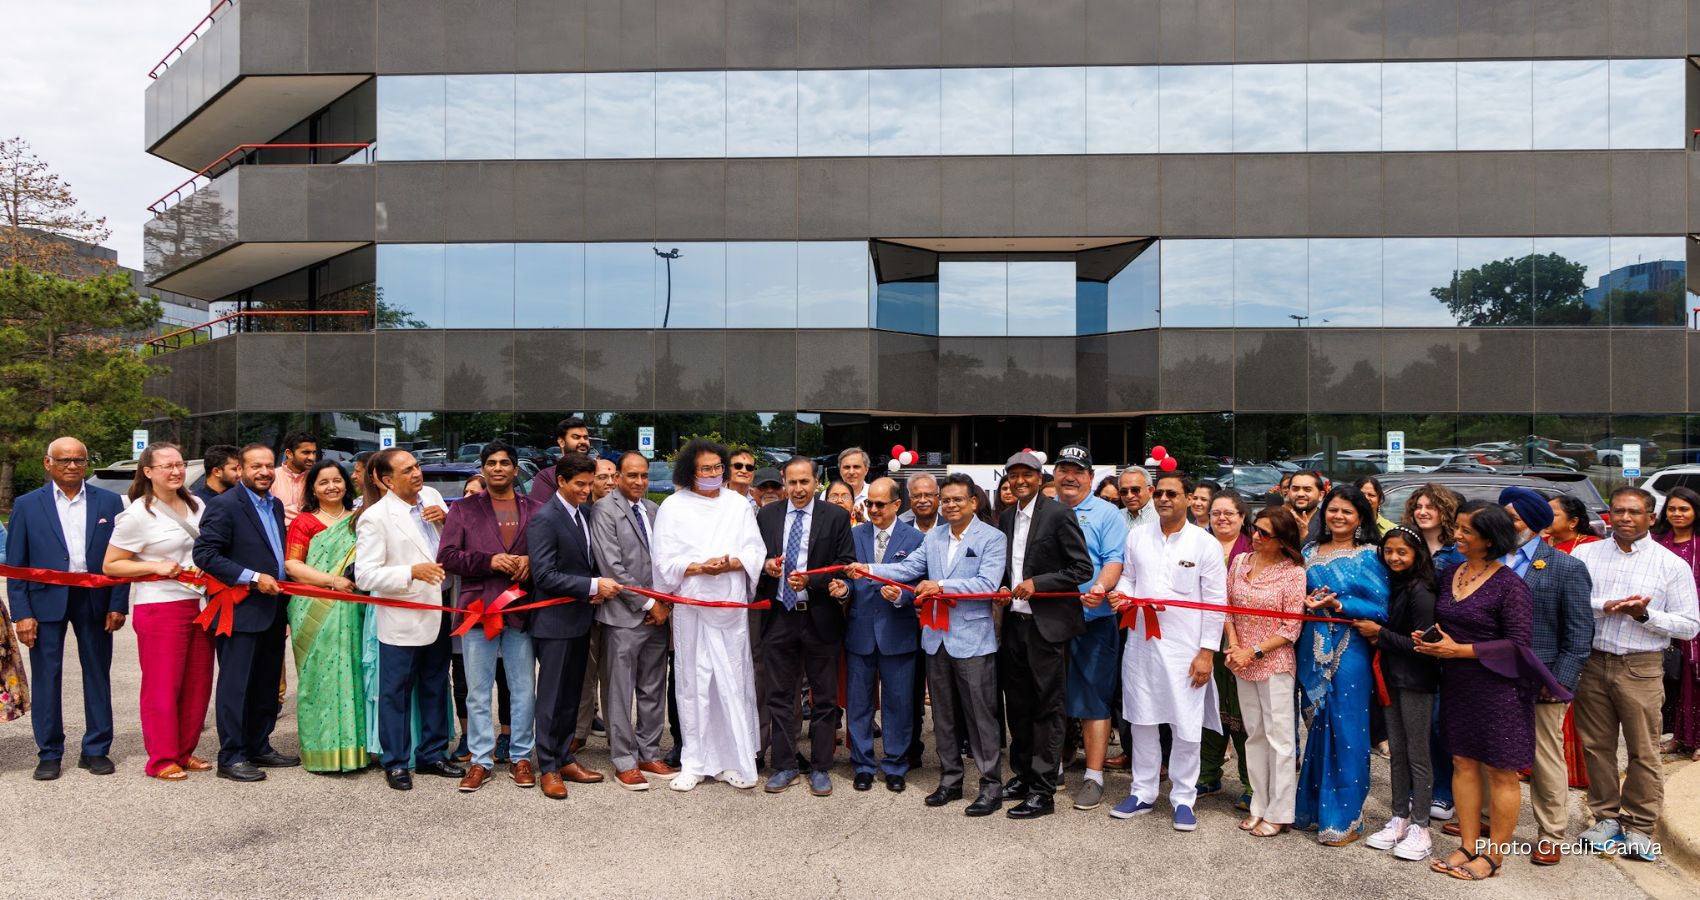 National India Hub, “Center of Excellence in Community Service” Inaugurated in Schaumburg, Illinois